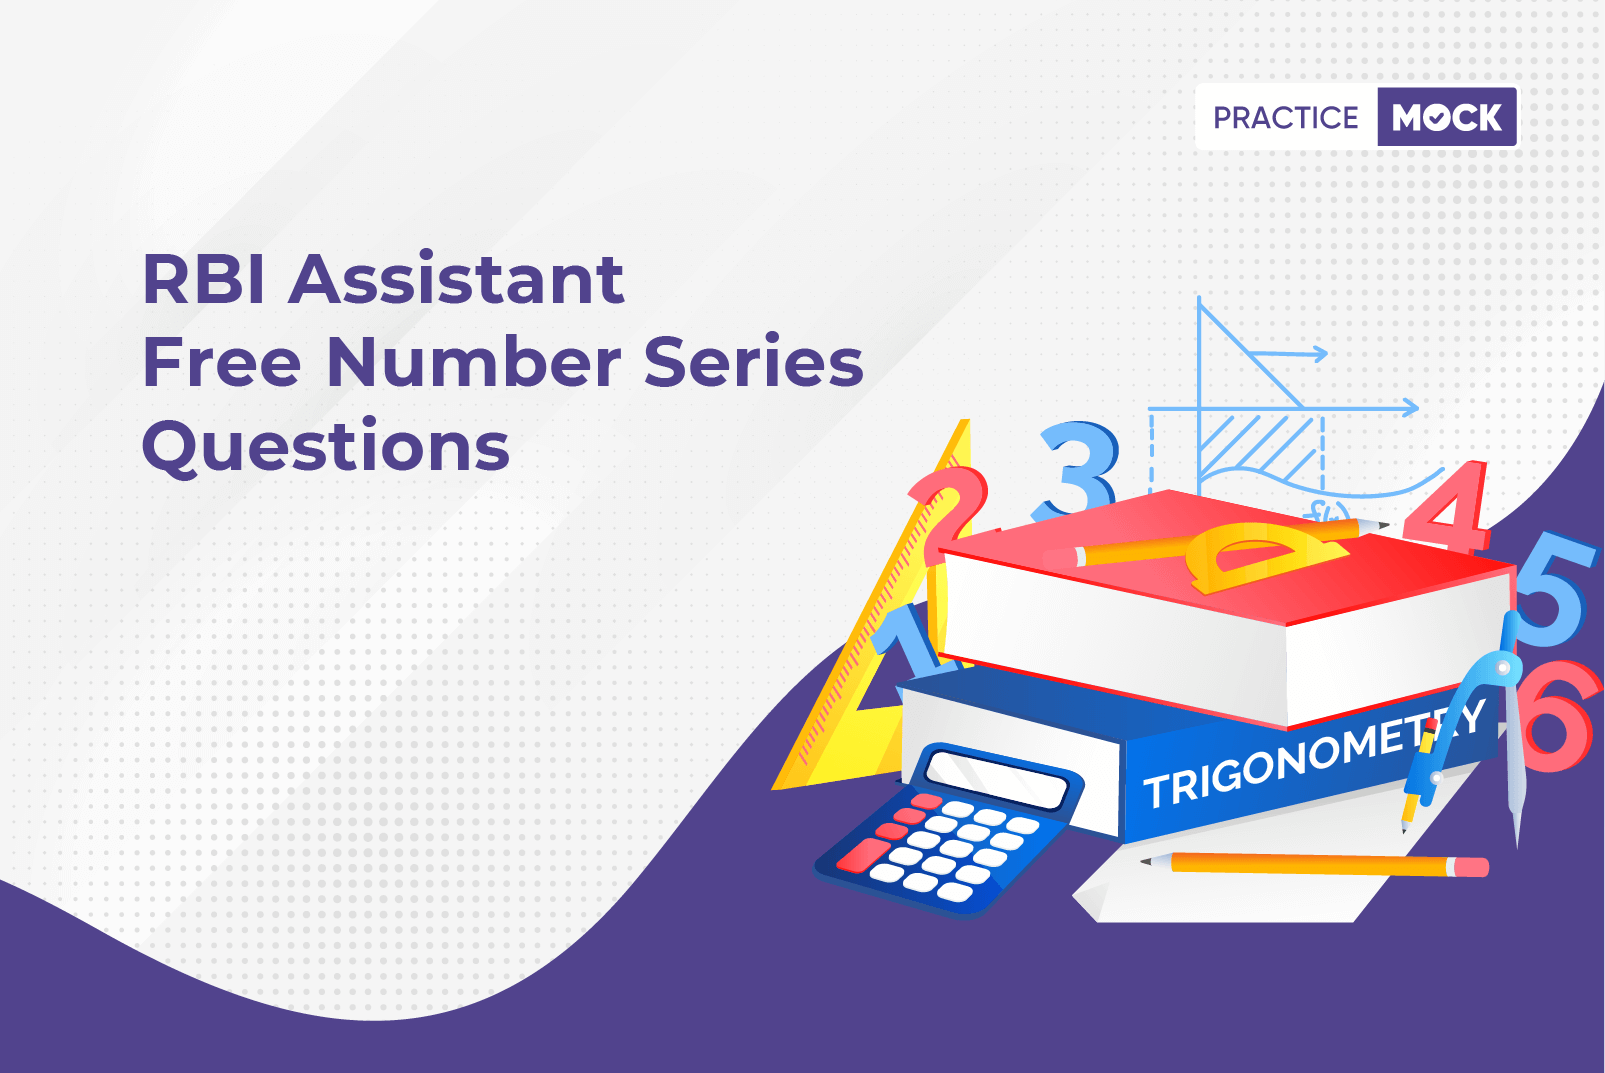 RBI Assistant Free Number Series Questions